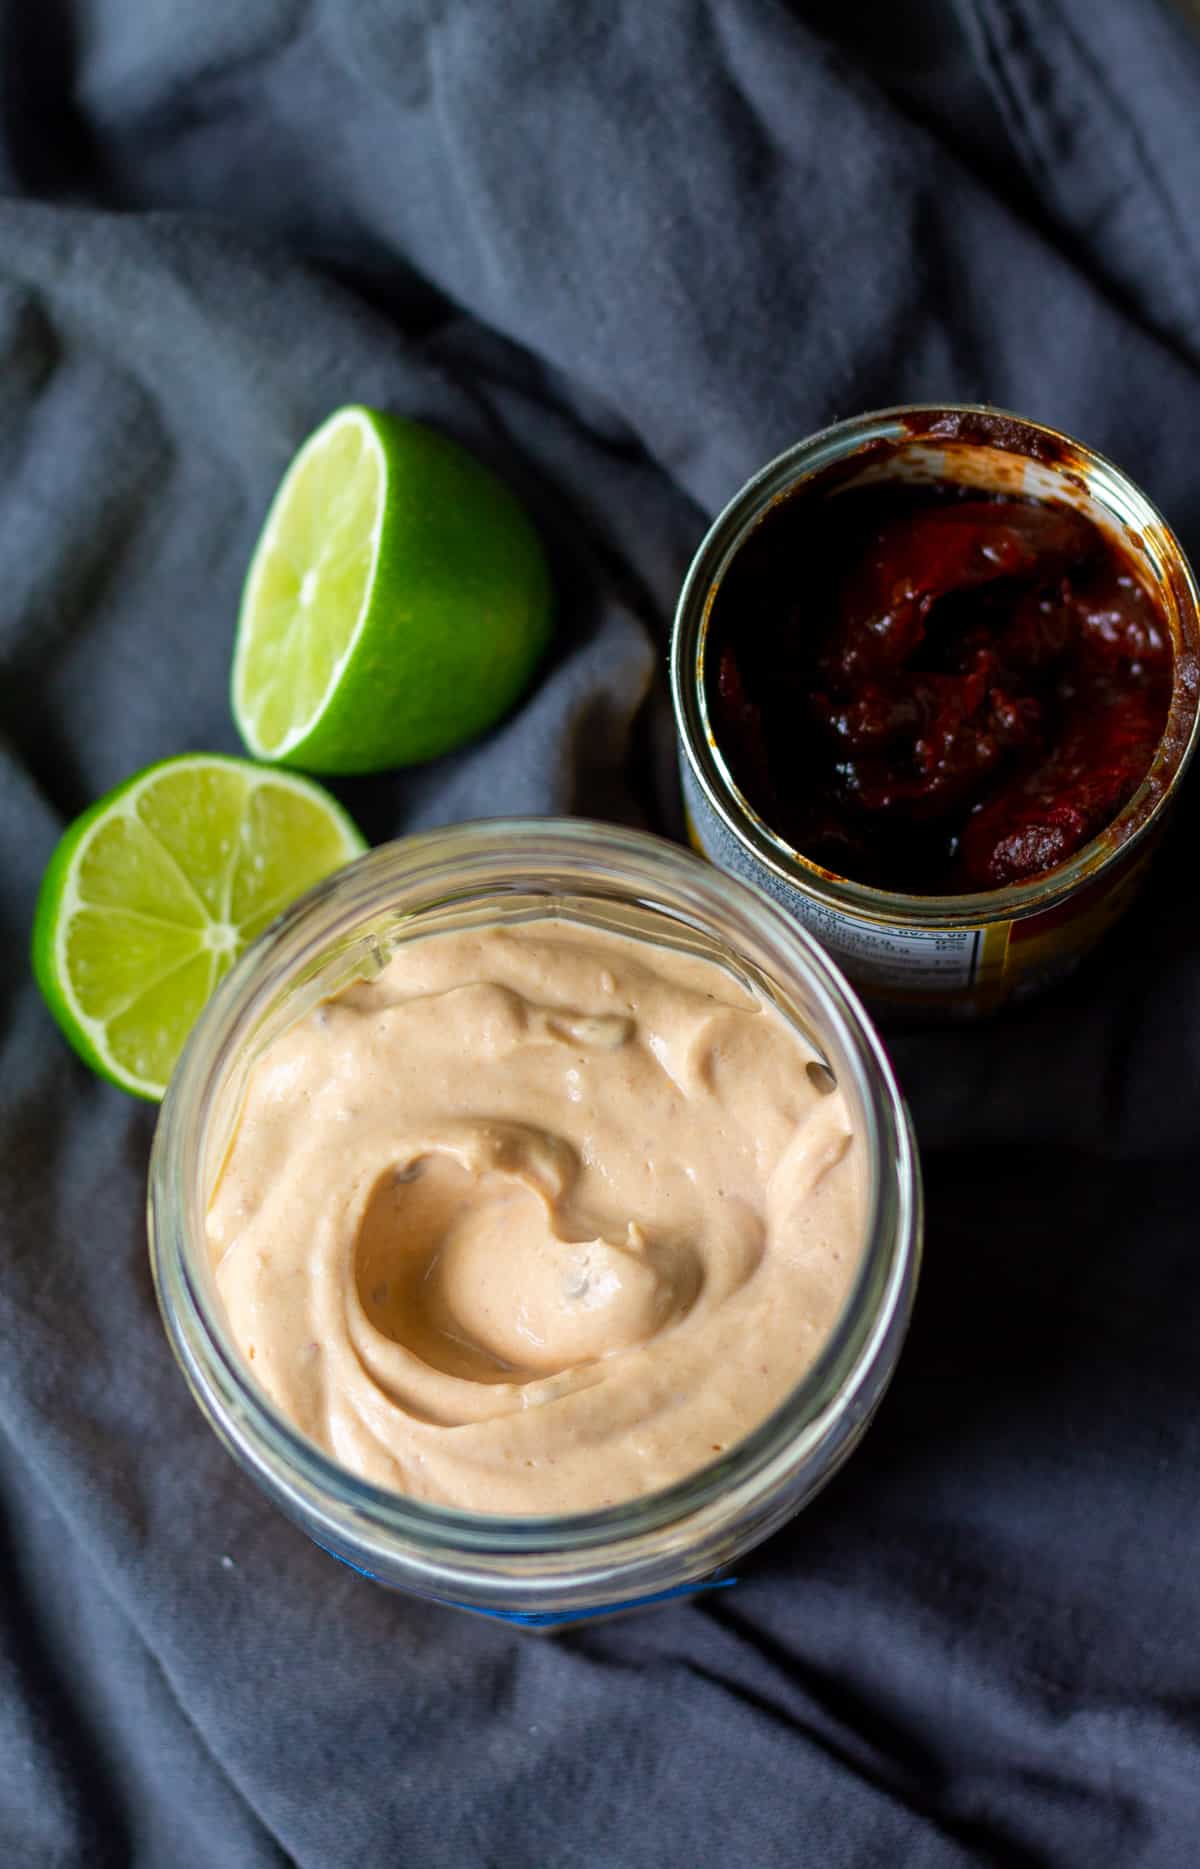 chipotle mayo in open jar, next to can of chipotle peppers in adobo sauce, cut limes